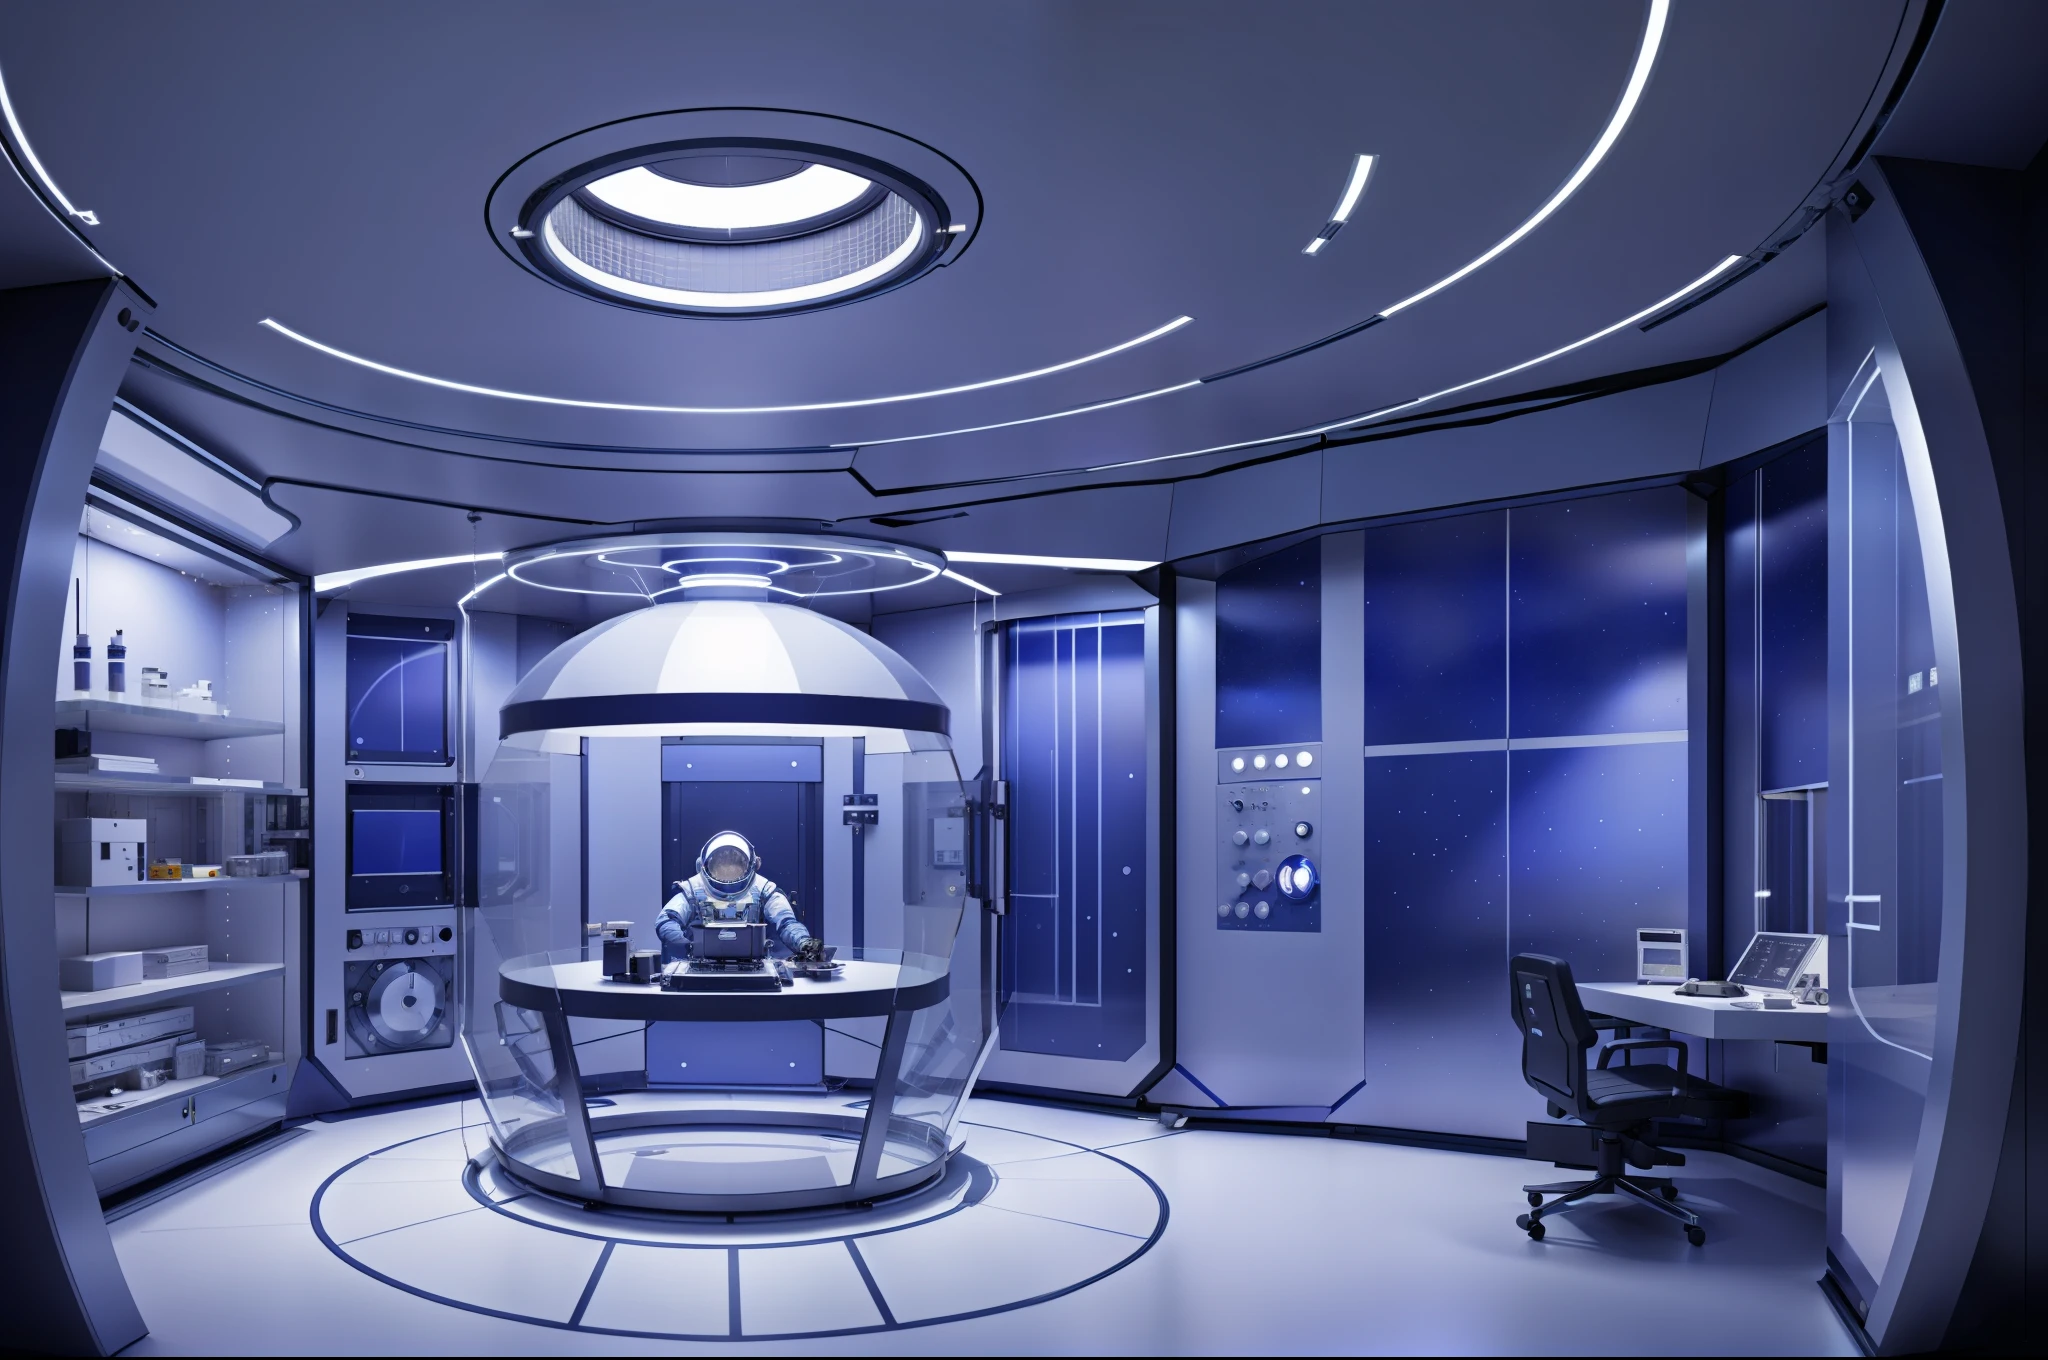 Inside the space station room in space，in a panoramic view，wide angles，extreme hight detail，inside in room，Space capsule，Partial glass skylight，Tech panel screens and glasakina，Sci-fi，conceptual，Reflective，circuit，Cluttered room，a desk，a chair，interior setting，metal floor，janelas，dining room，metal gate，lamplight。